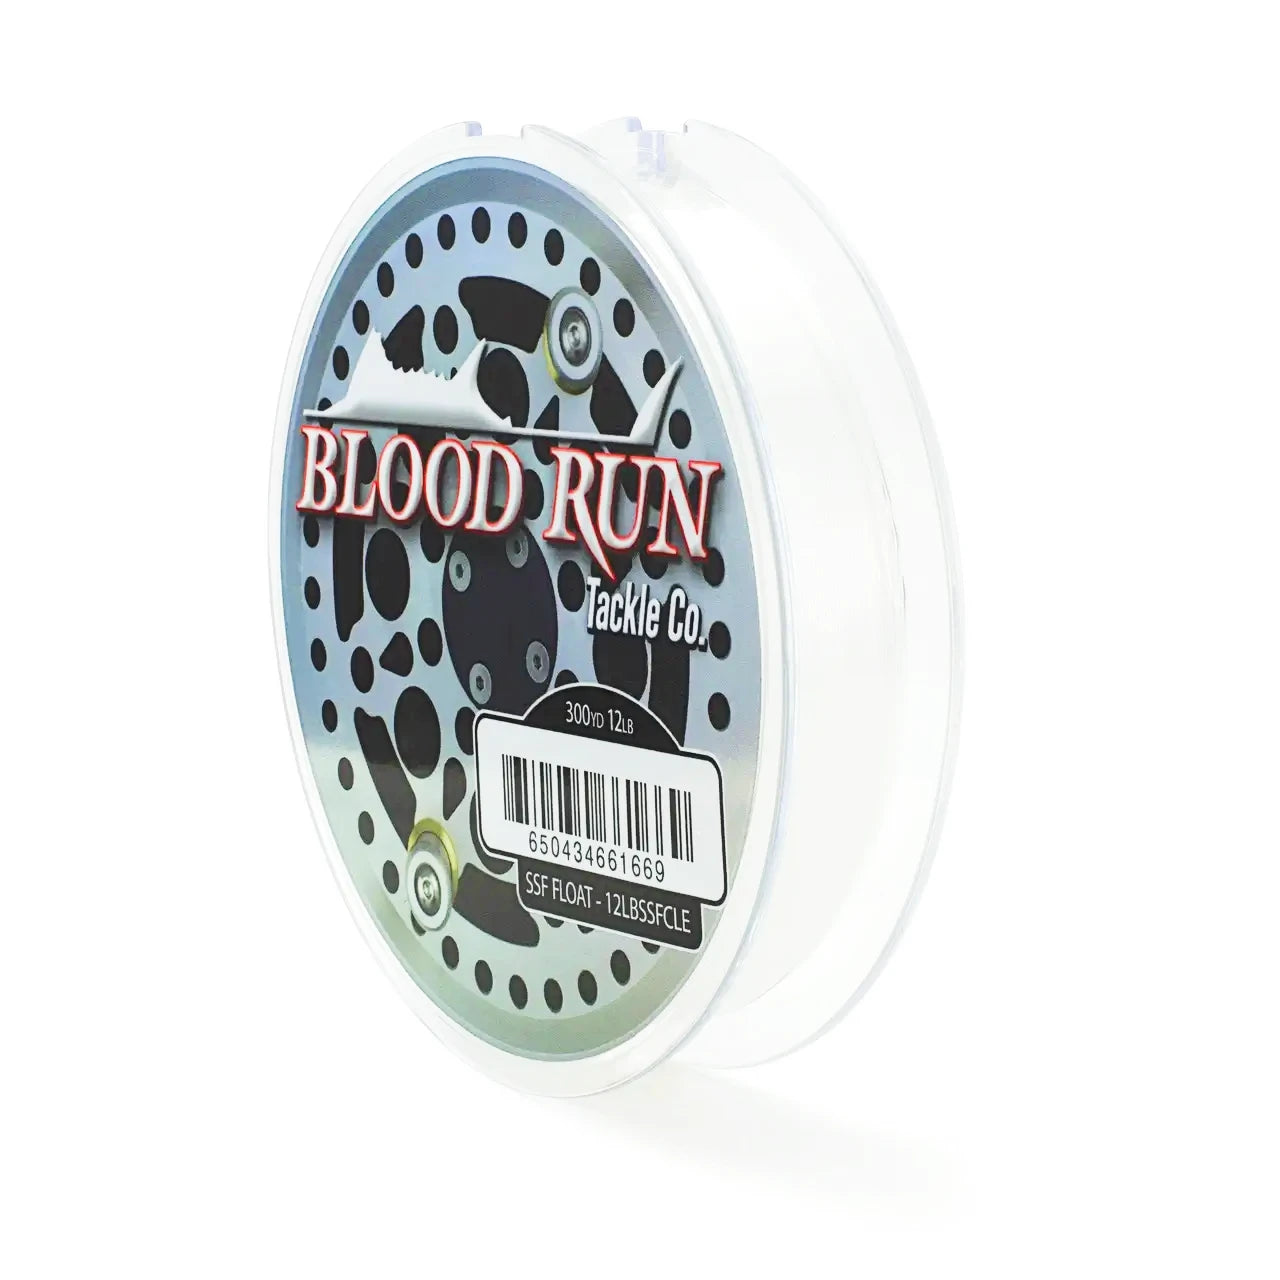 BLOOD RUN FLUOROCARBON LEADER XL 20LB 25YD .017IN – Tangled Tackle Co